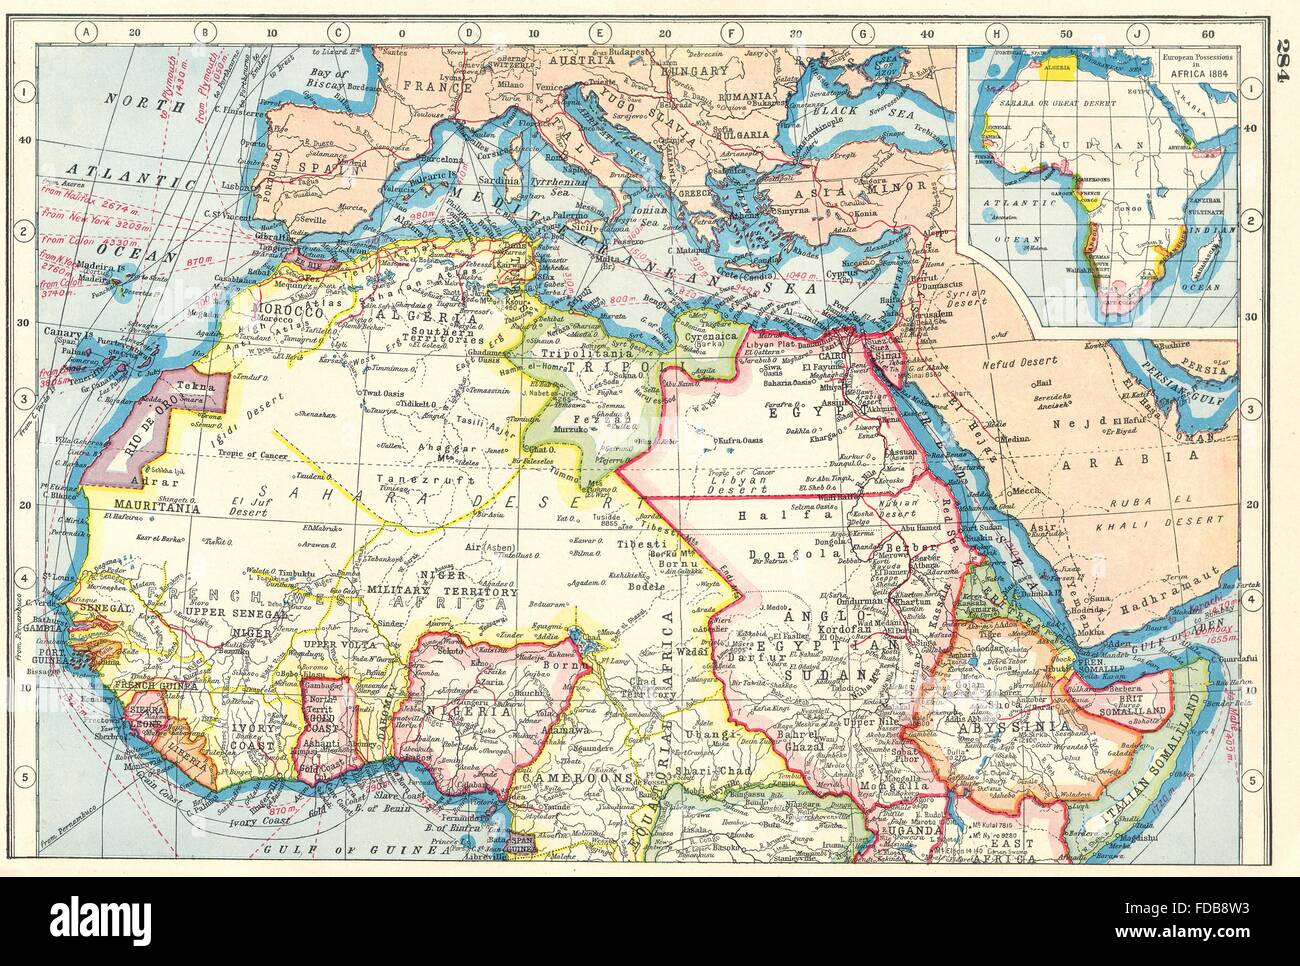 Nord Africa: inset colonie europee in Africa 1884. HARMSWORTH, 1920 mappa vecchia Foto Stock